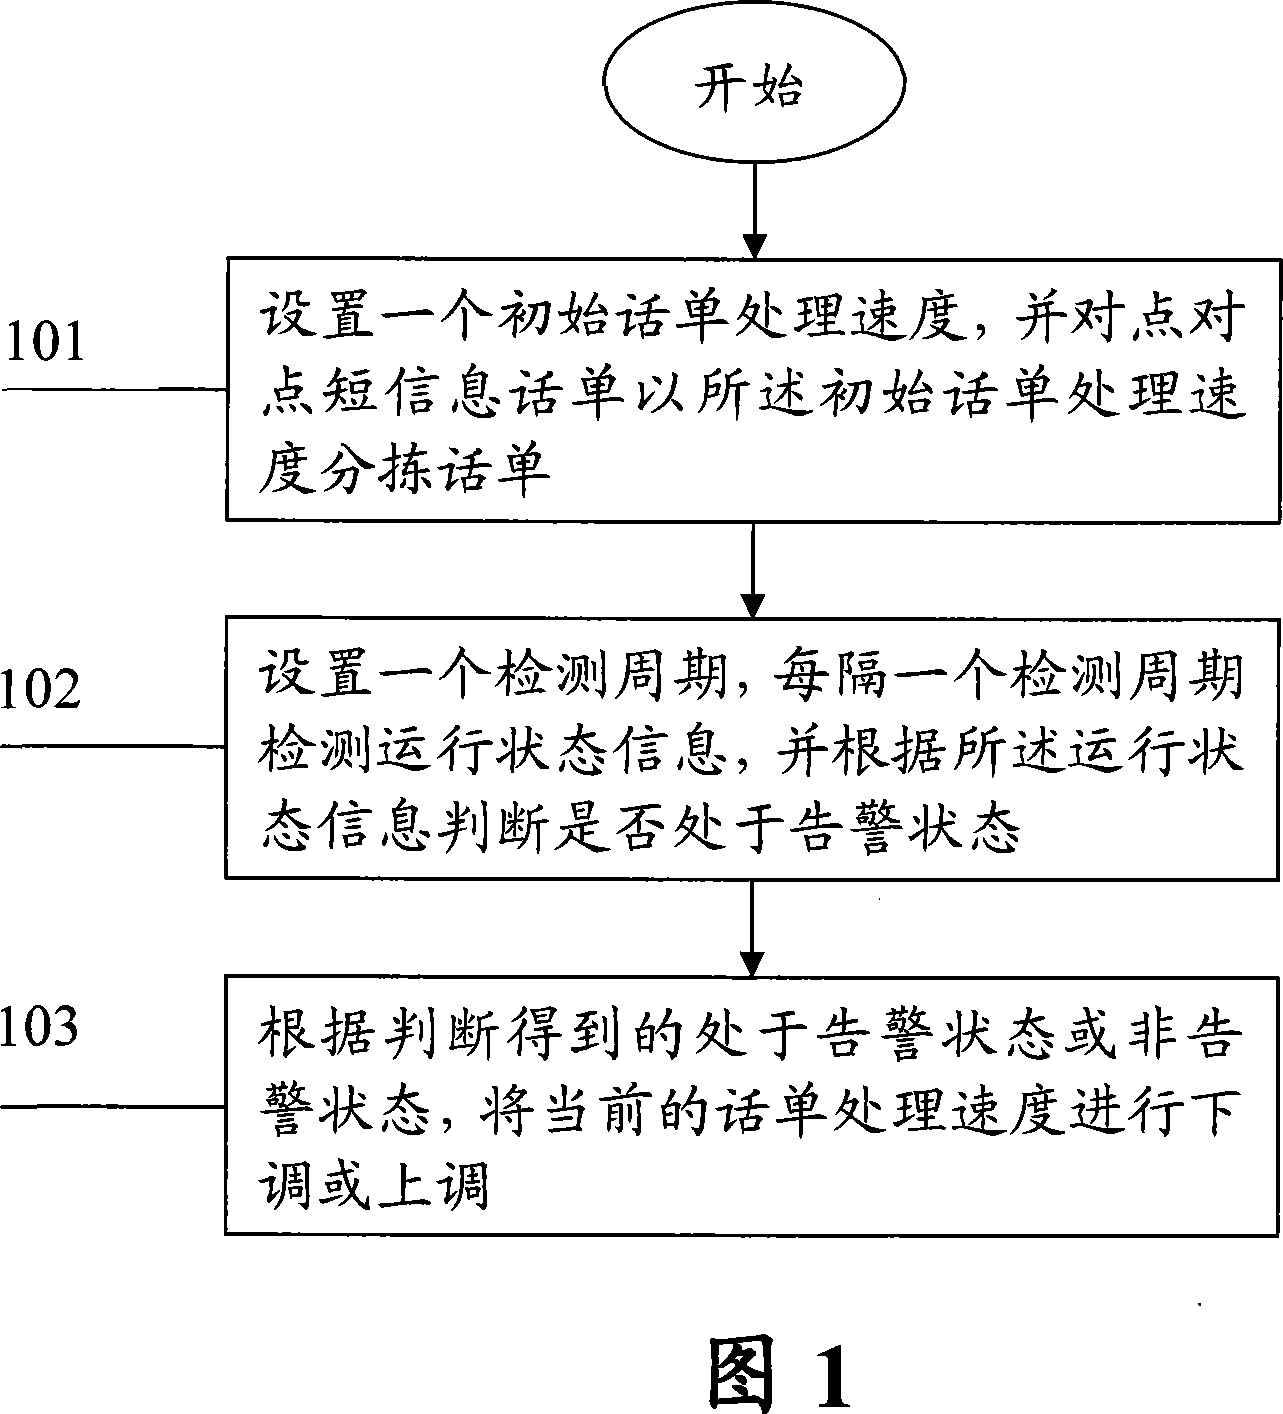 Dynamically regulating method for point-to-point message conversation list processing speed